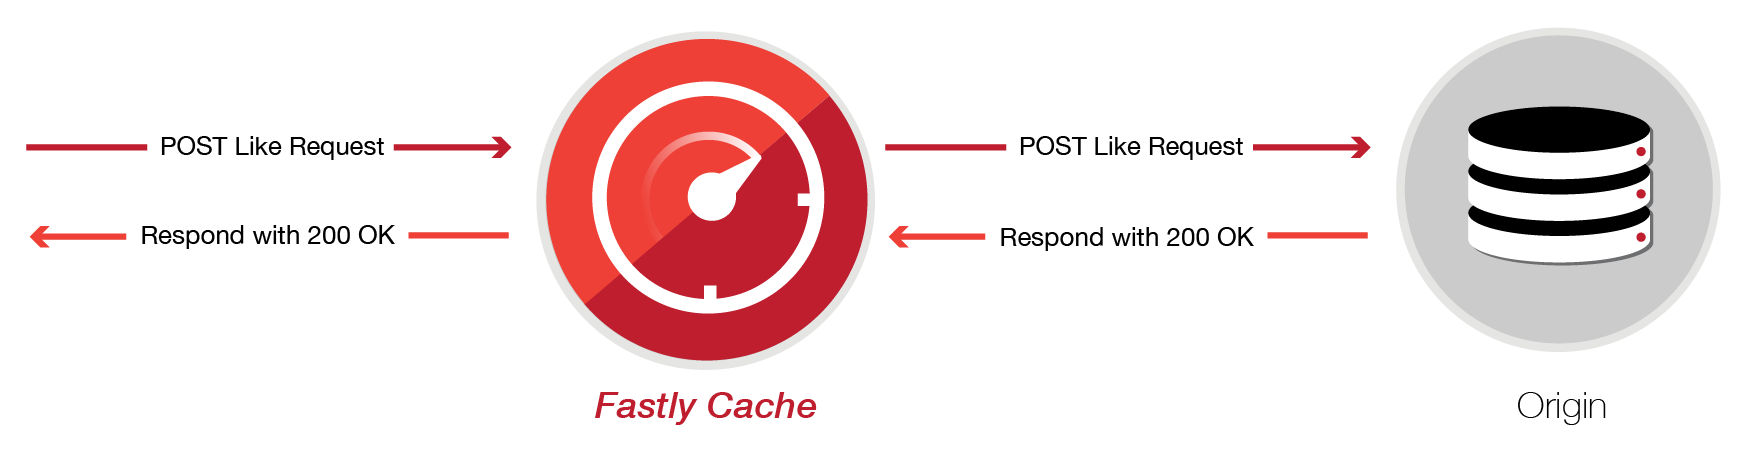 Fastly Cache 1